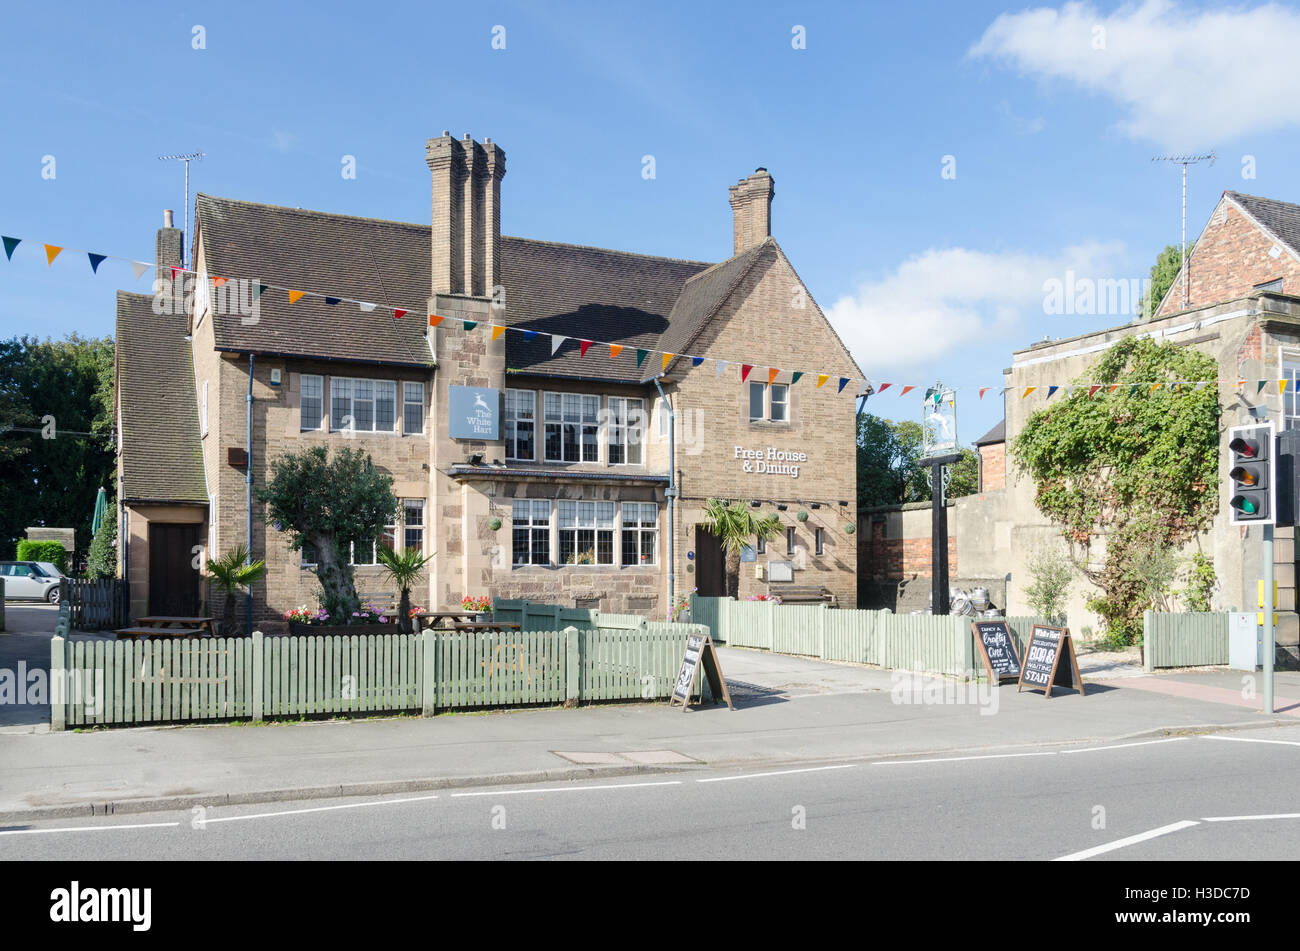 The White Hart pub and restaurant in the Derbyshire town of Duffield Stock Photo